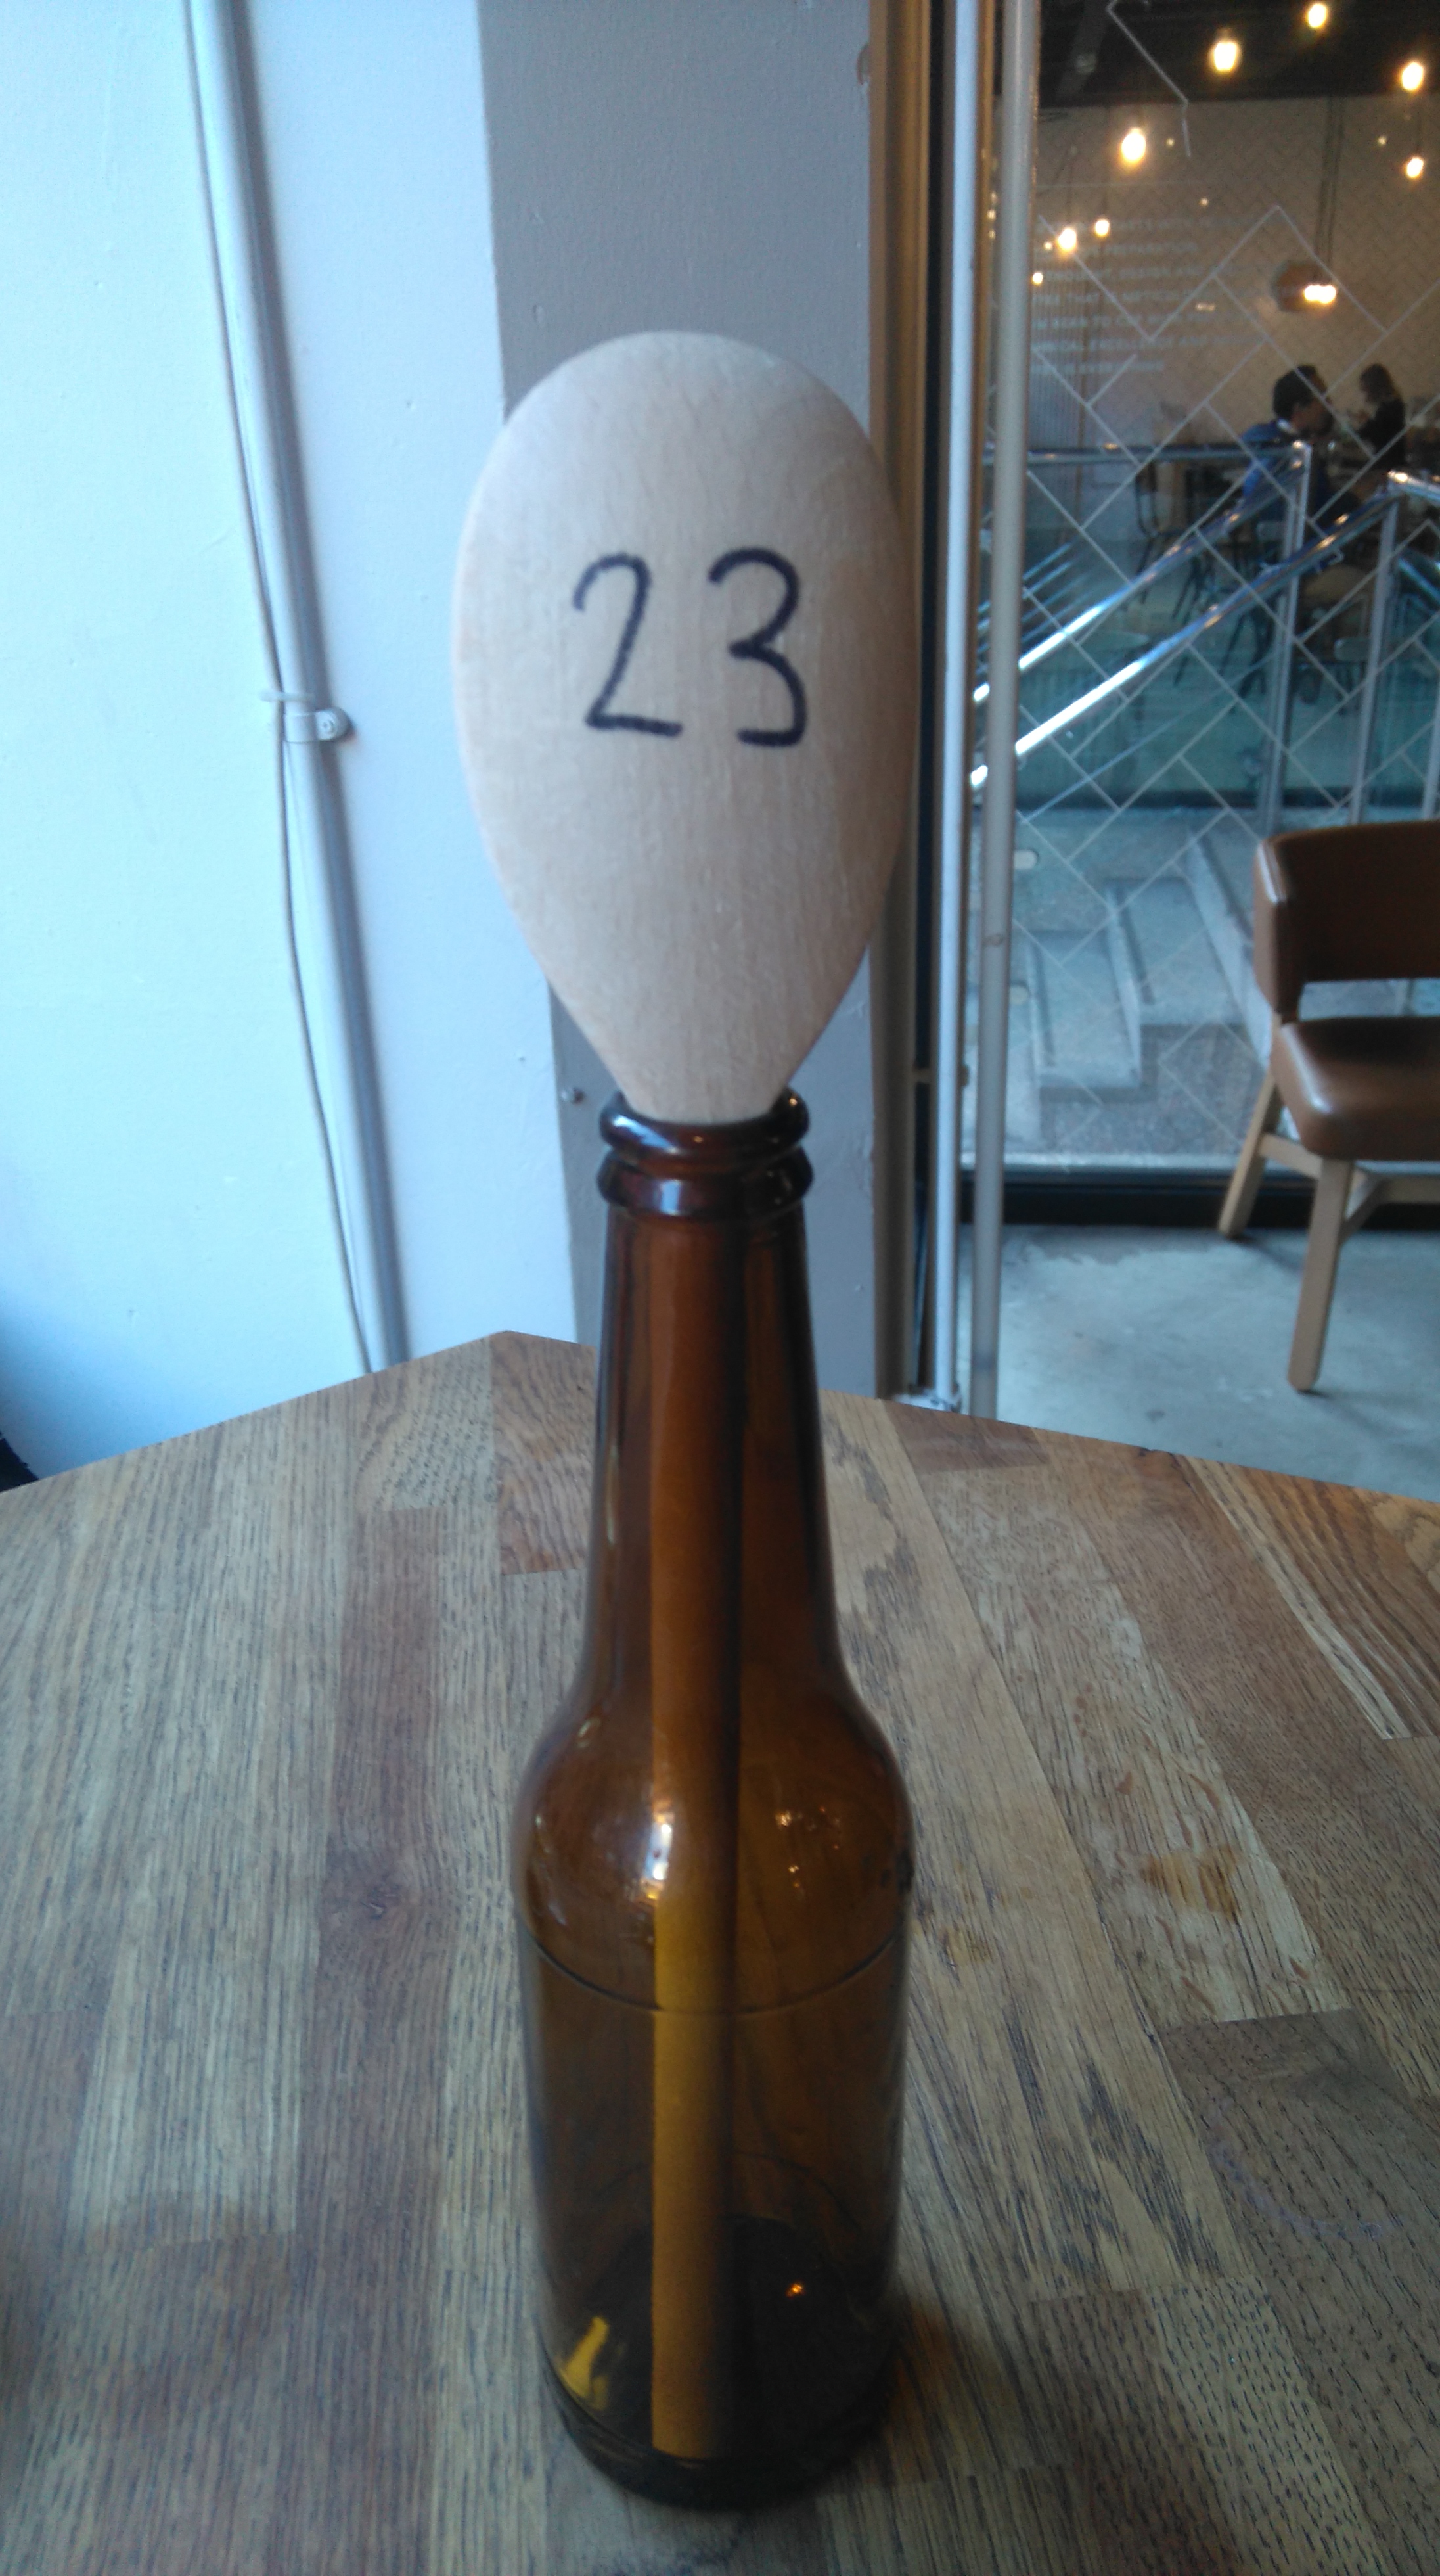 Foundation Coffee House Order Number